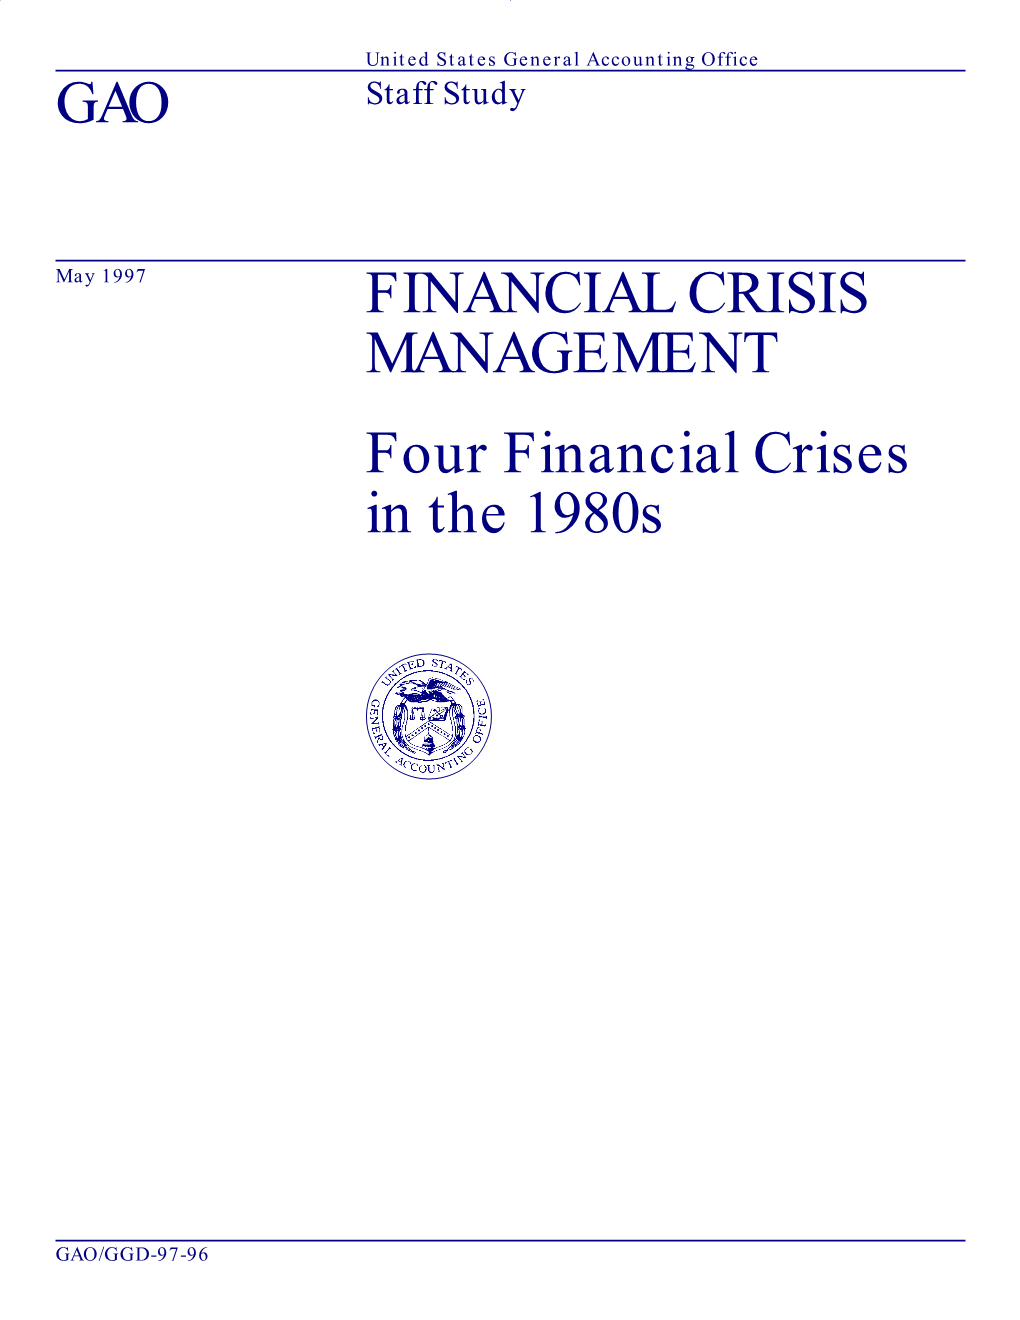 Four Financial Crises in the 1980S